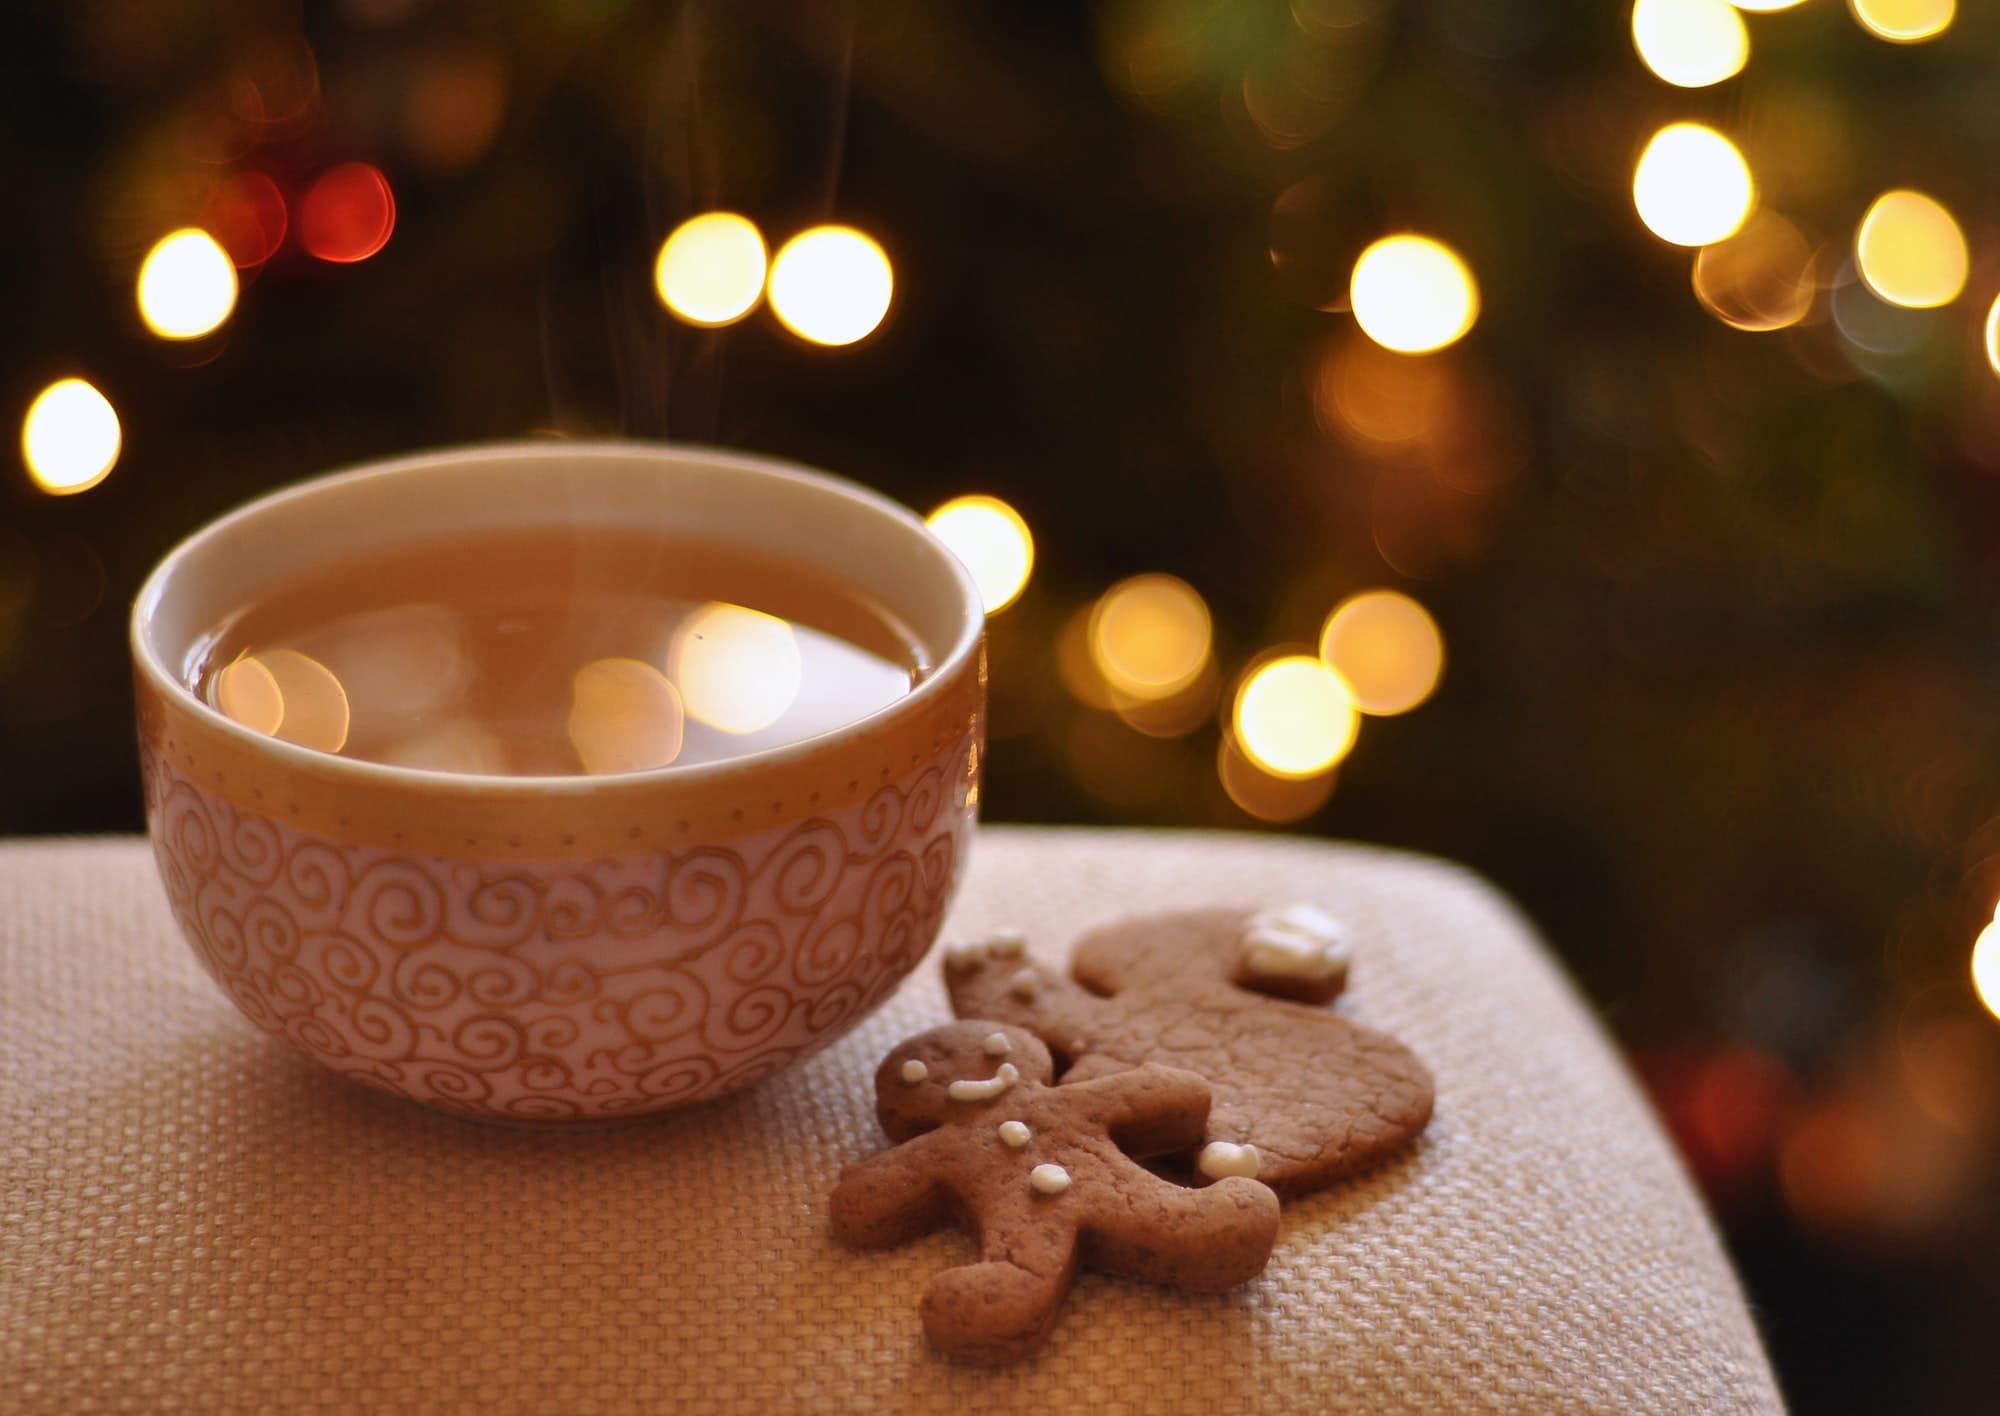 Cup of tea with gingerbread cookies